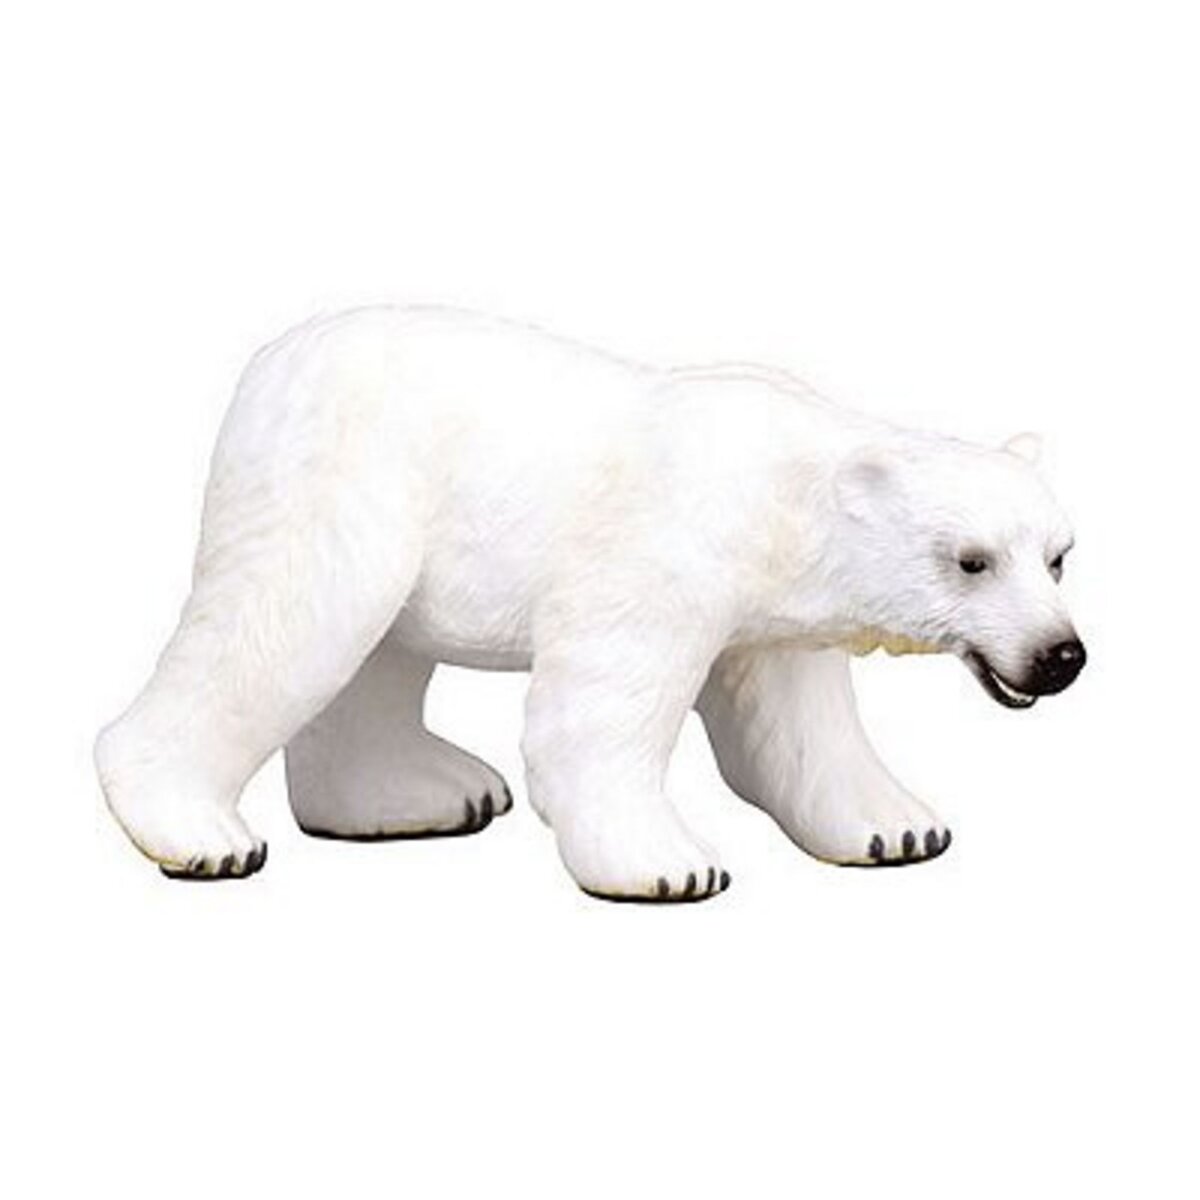 Figurines Collecta Figurine Ours blanc